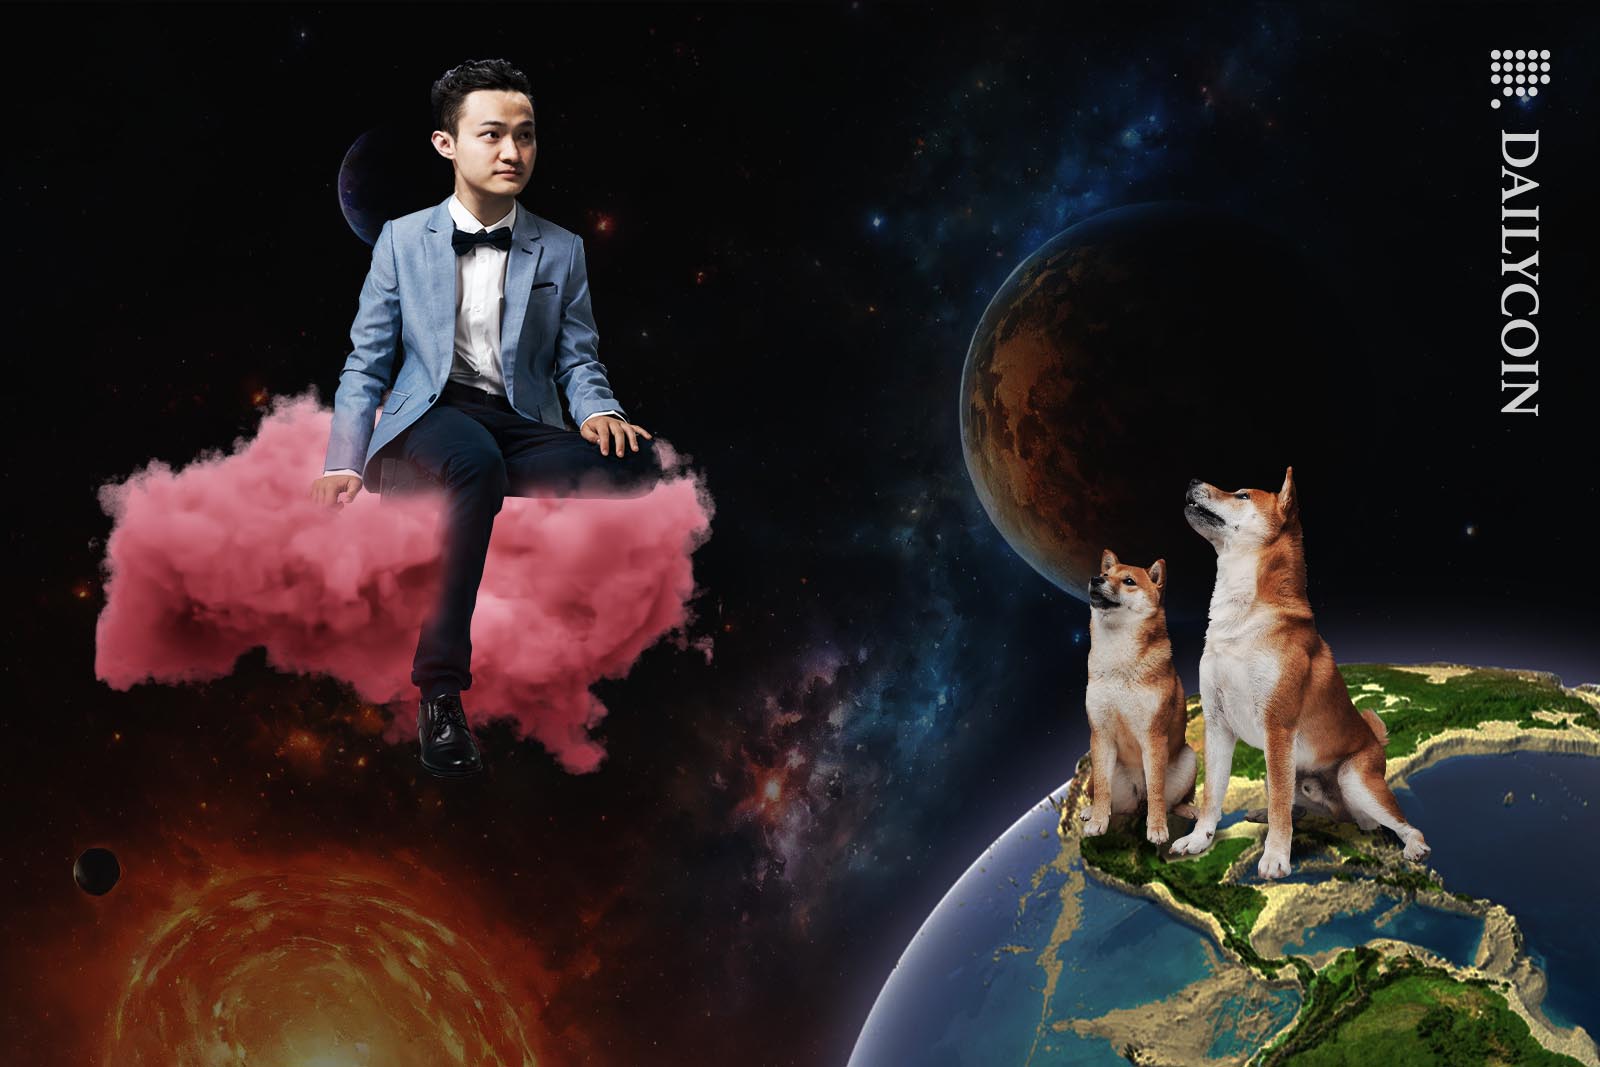 Justin Sun sitting on a pink cloud in outter space as two Shiba inus wathching from Earth.